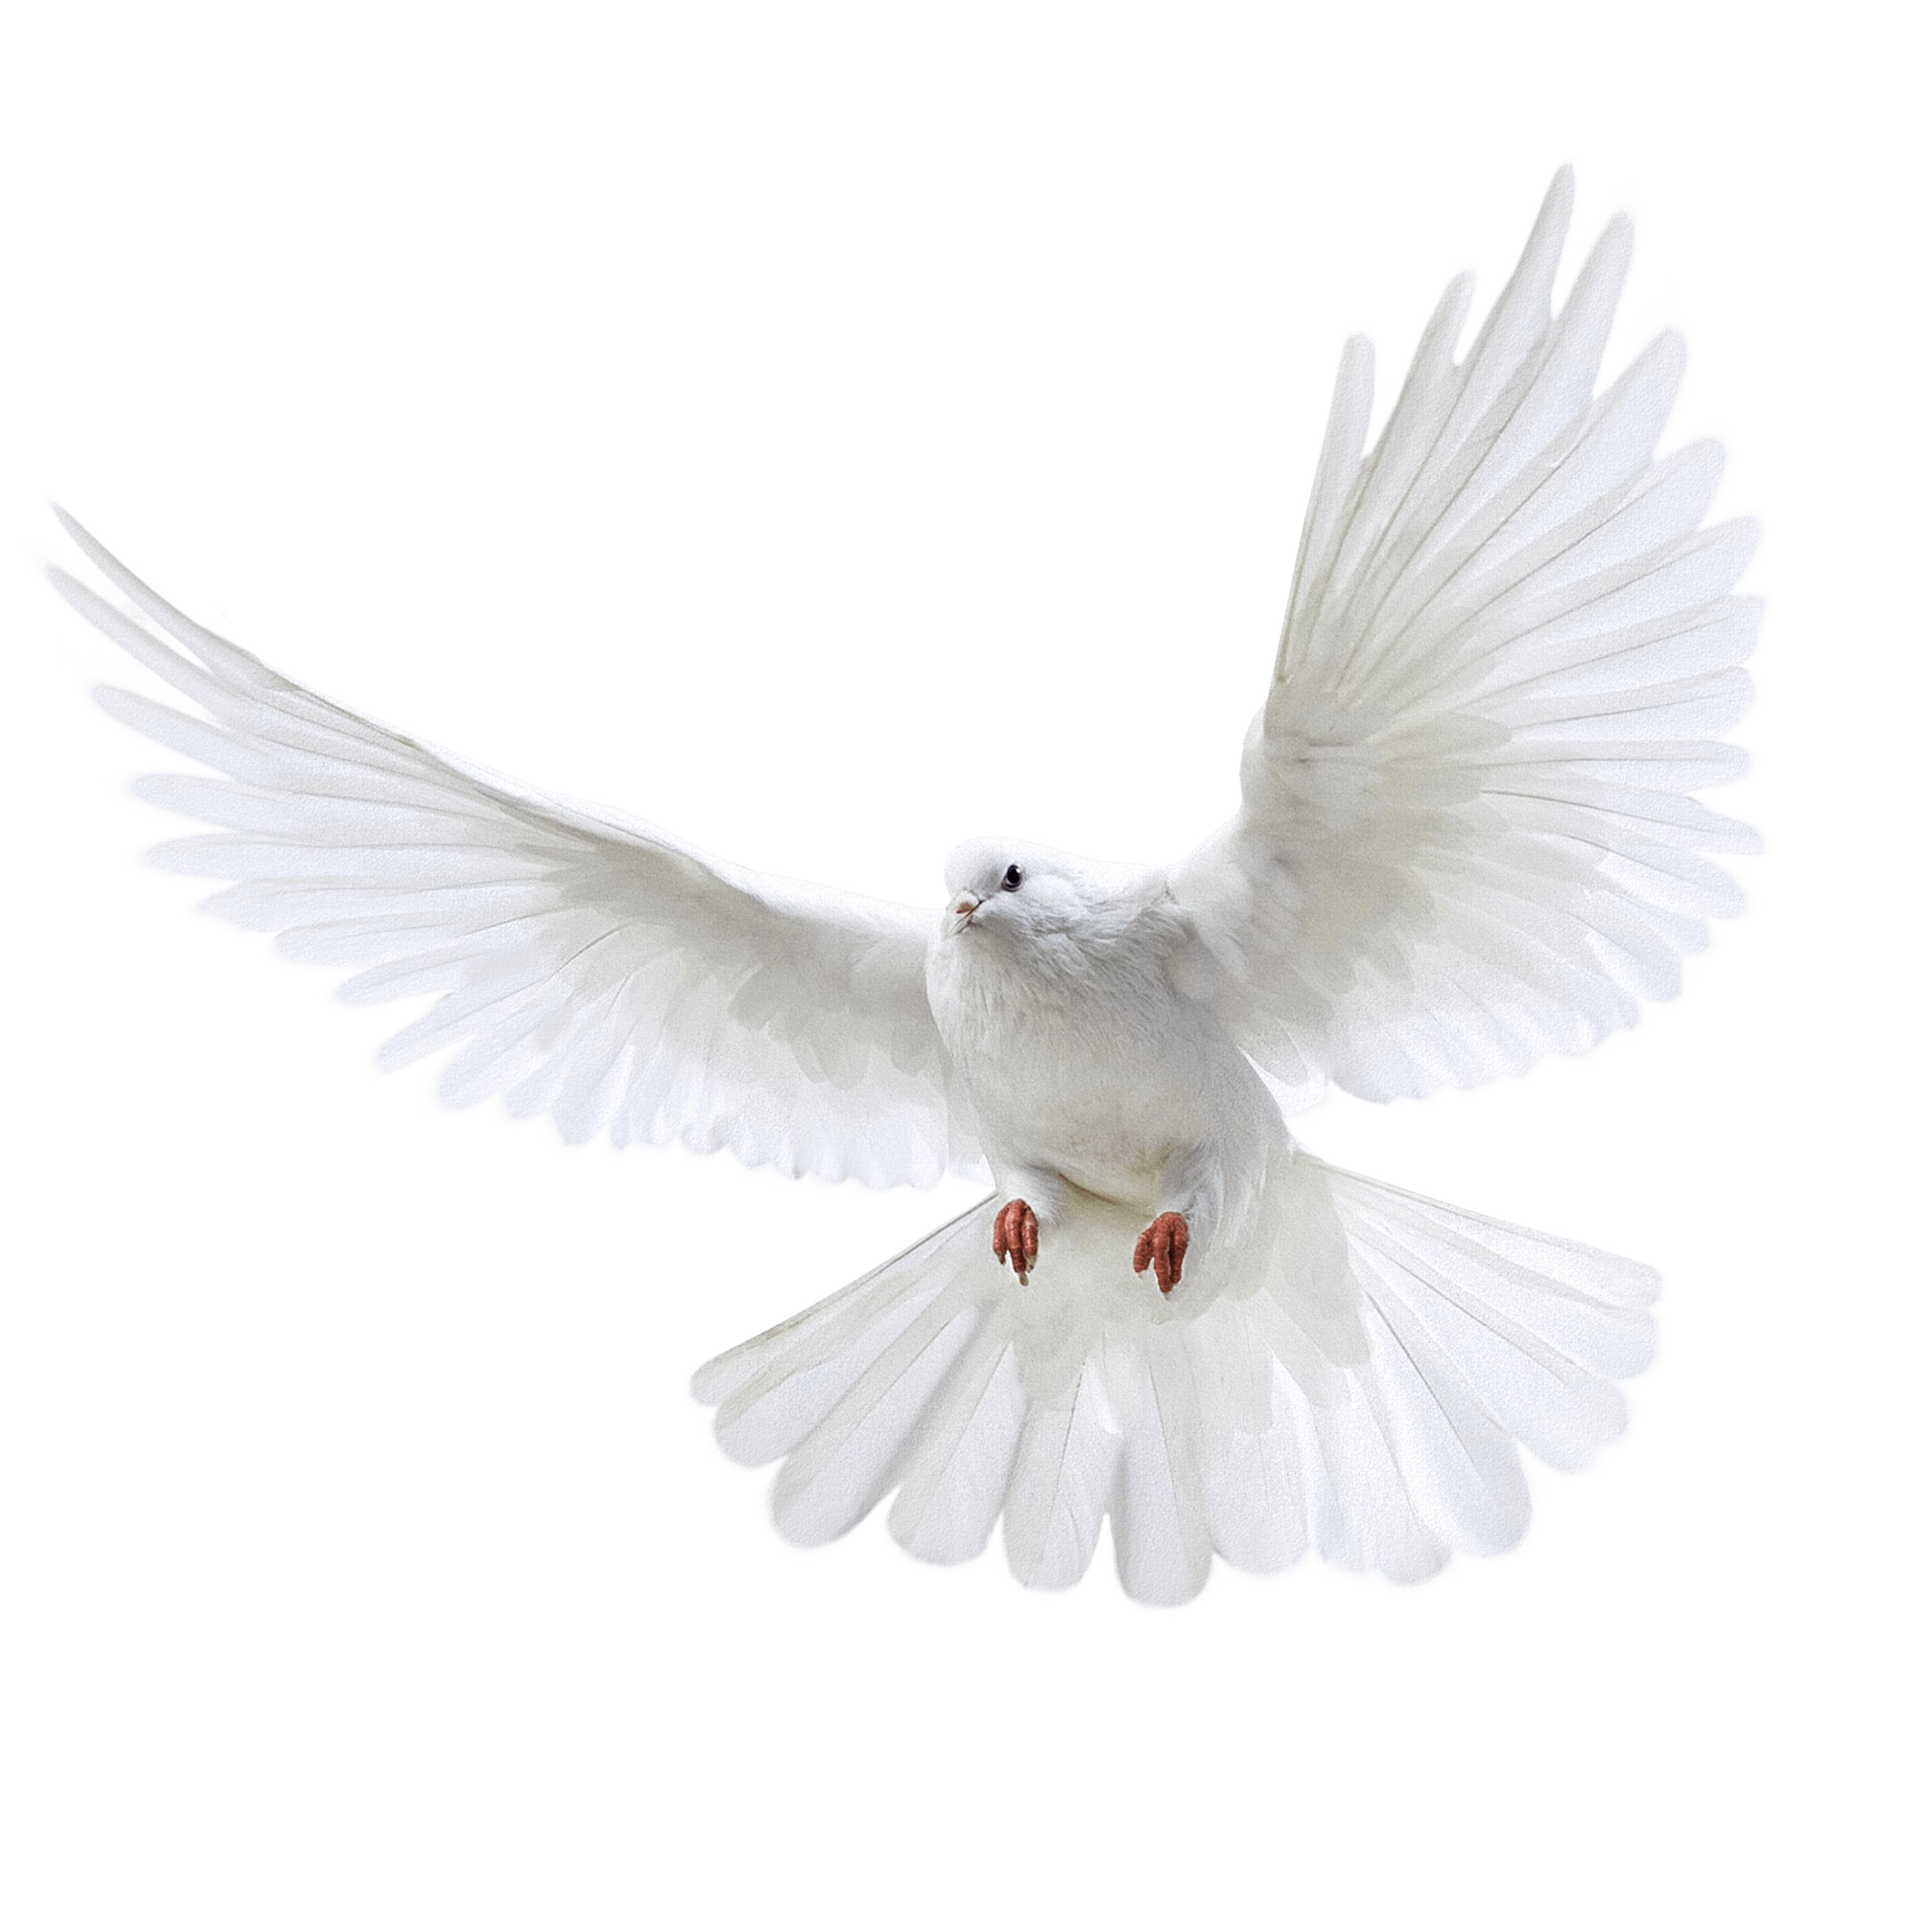 White Flying Pigeon Png Image Png Image - Pigeon, Transparent background PNG HD thumbnail